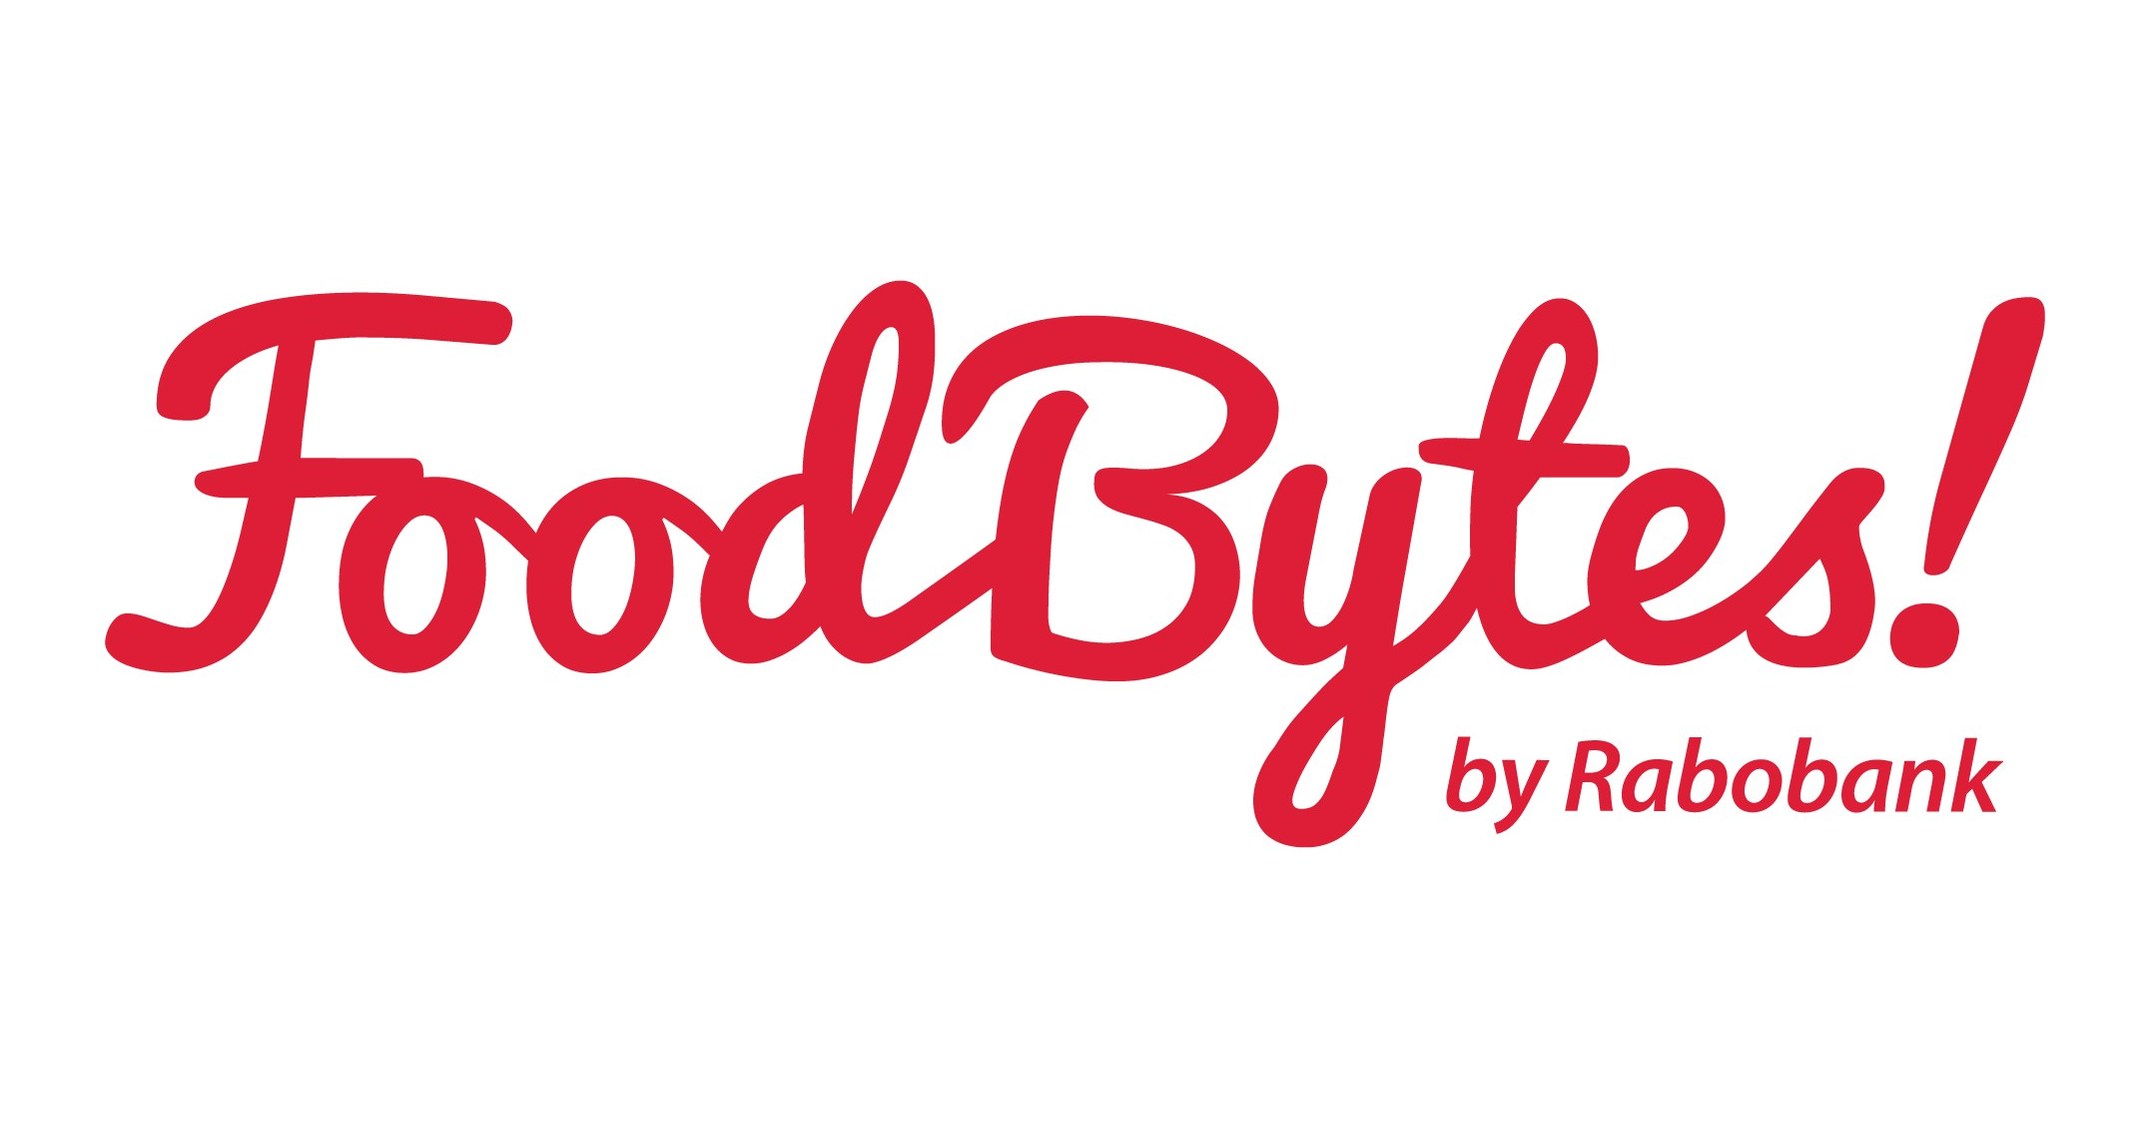 Hypercell Technologies Selected as Standout Startup for FoodBytes! Program 4 Hypercell Technologies Selected as Standout Startup for FoodBytes! Program